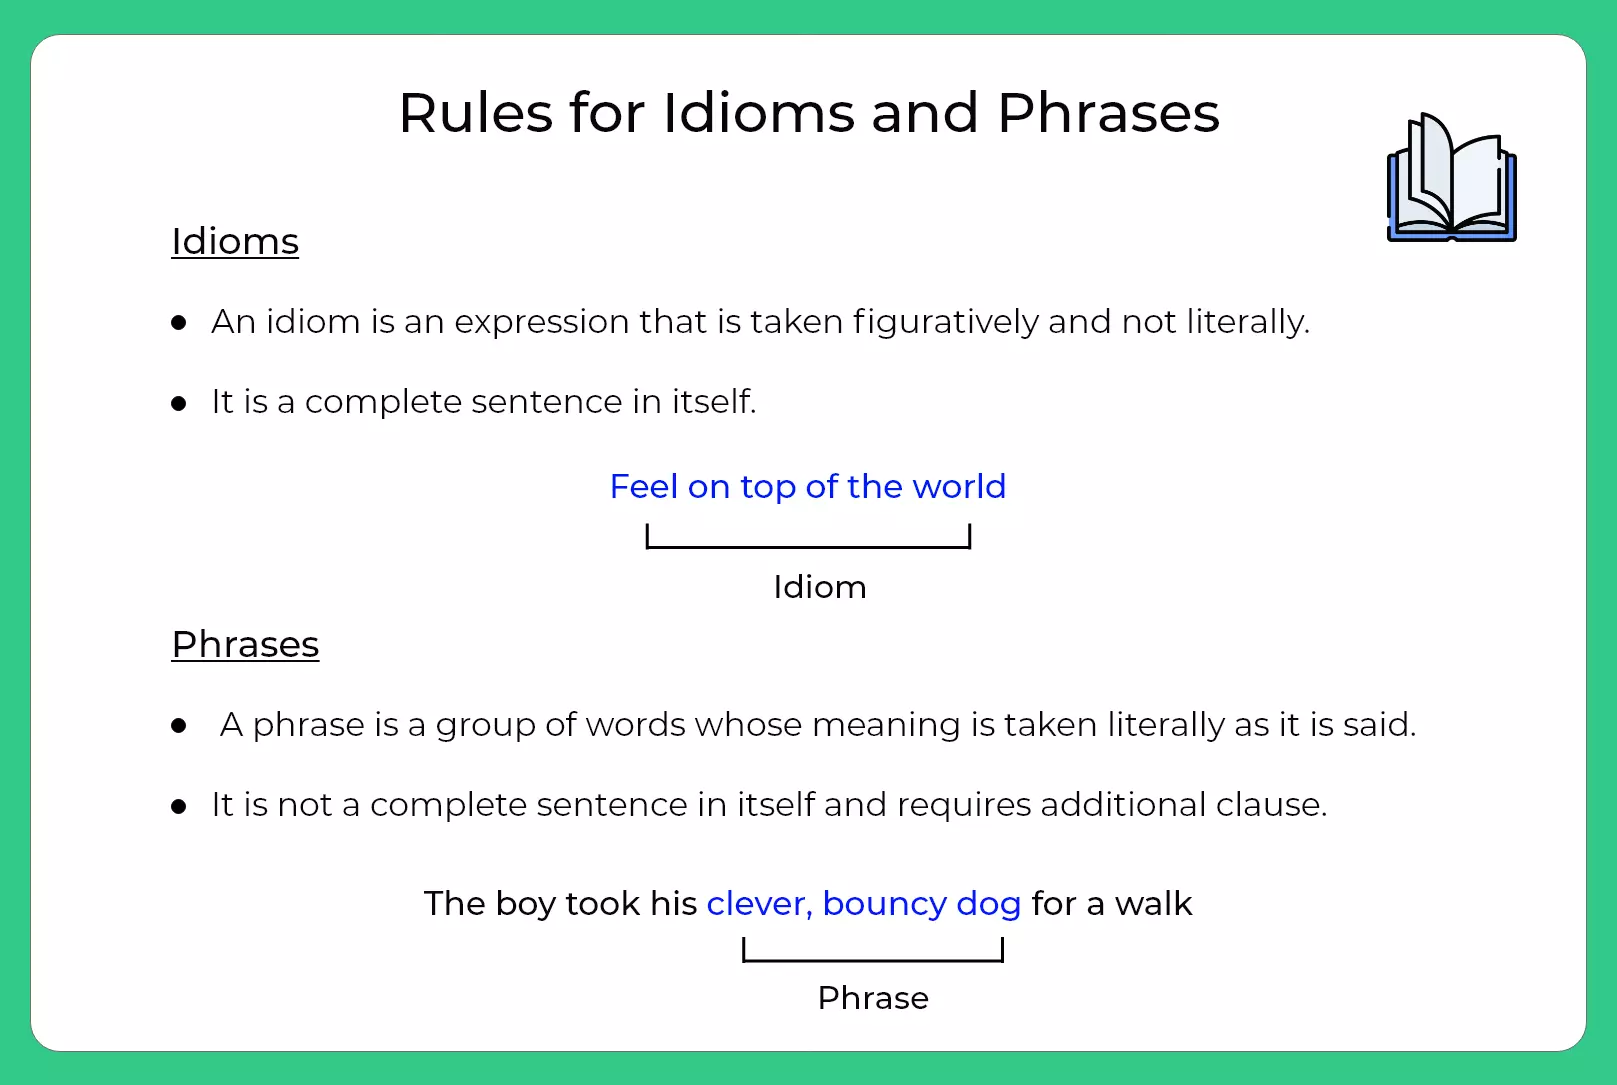 Rules For Idioms and Phrases